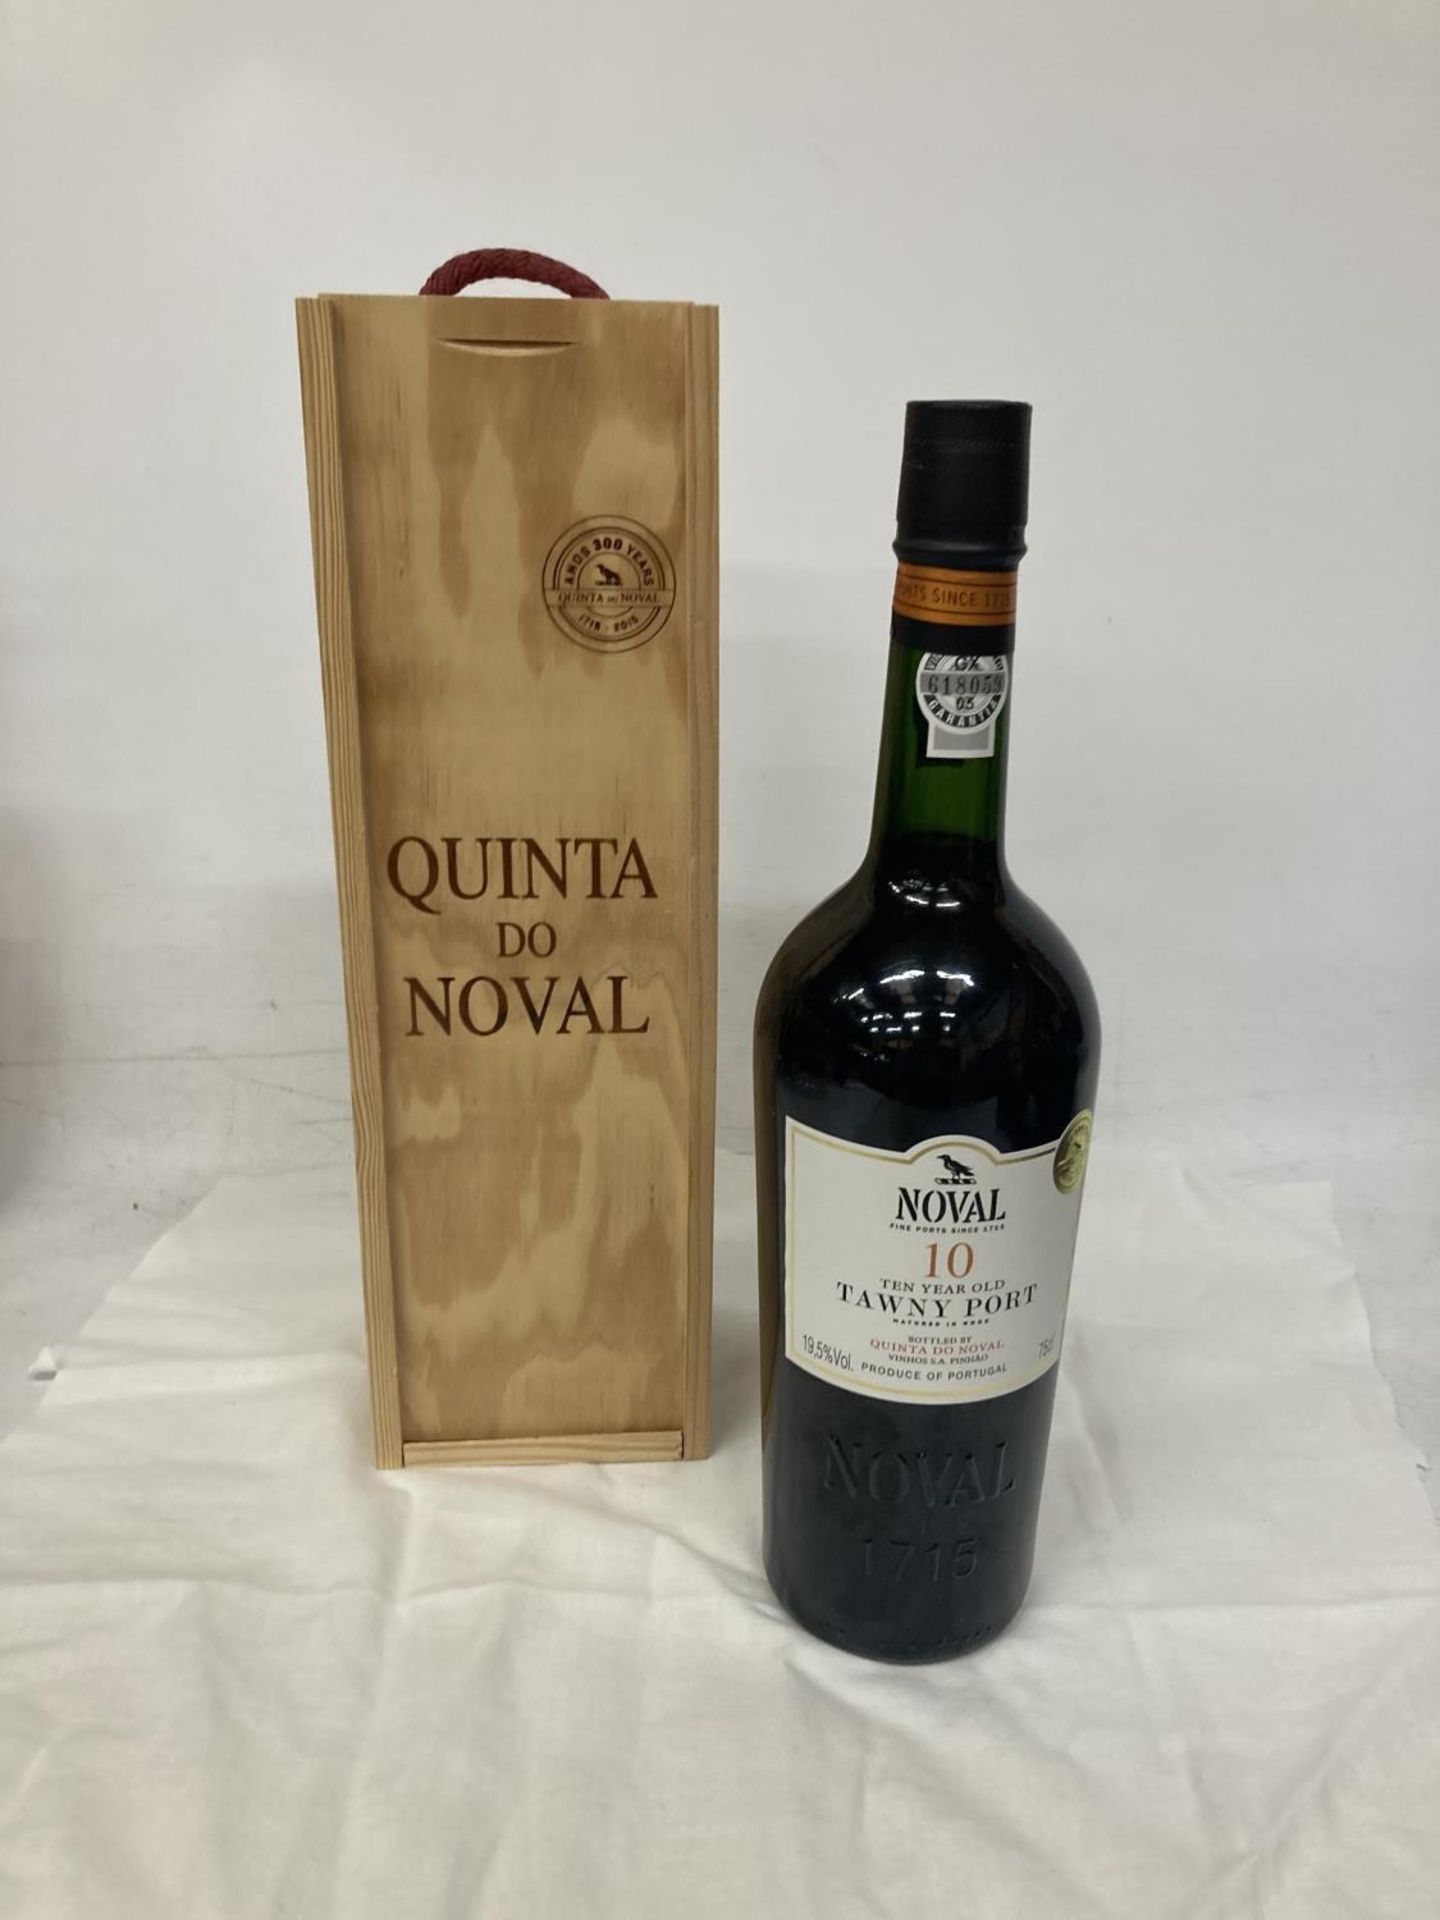 A 75CL BOTTLE OF NOVAL 10 YEAR OLD TAWNY PORT IN A WOODEN BOX - Image 2 of 4